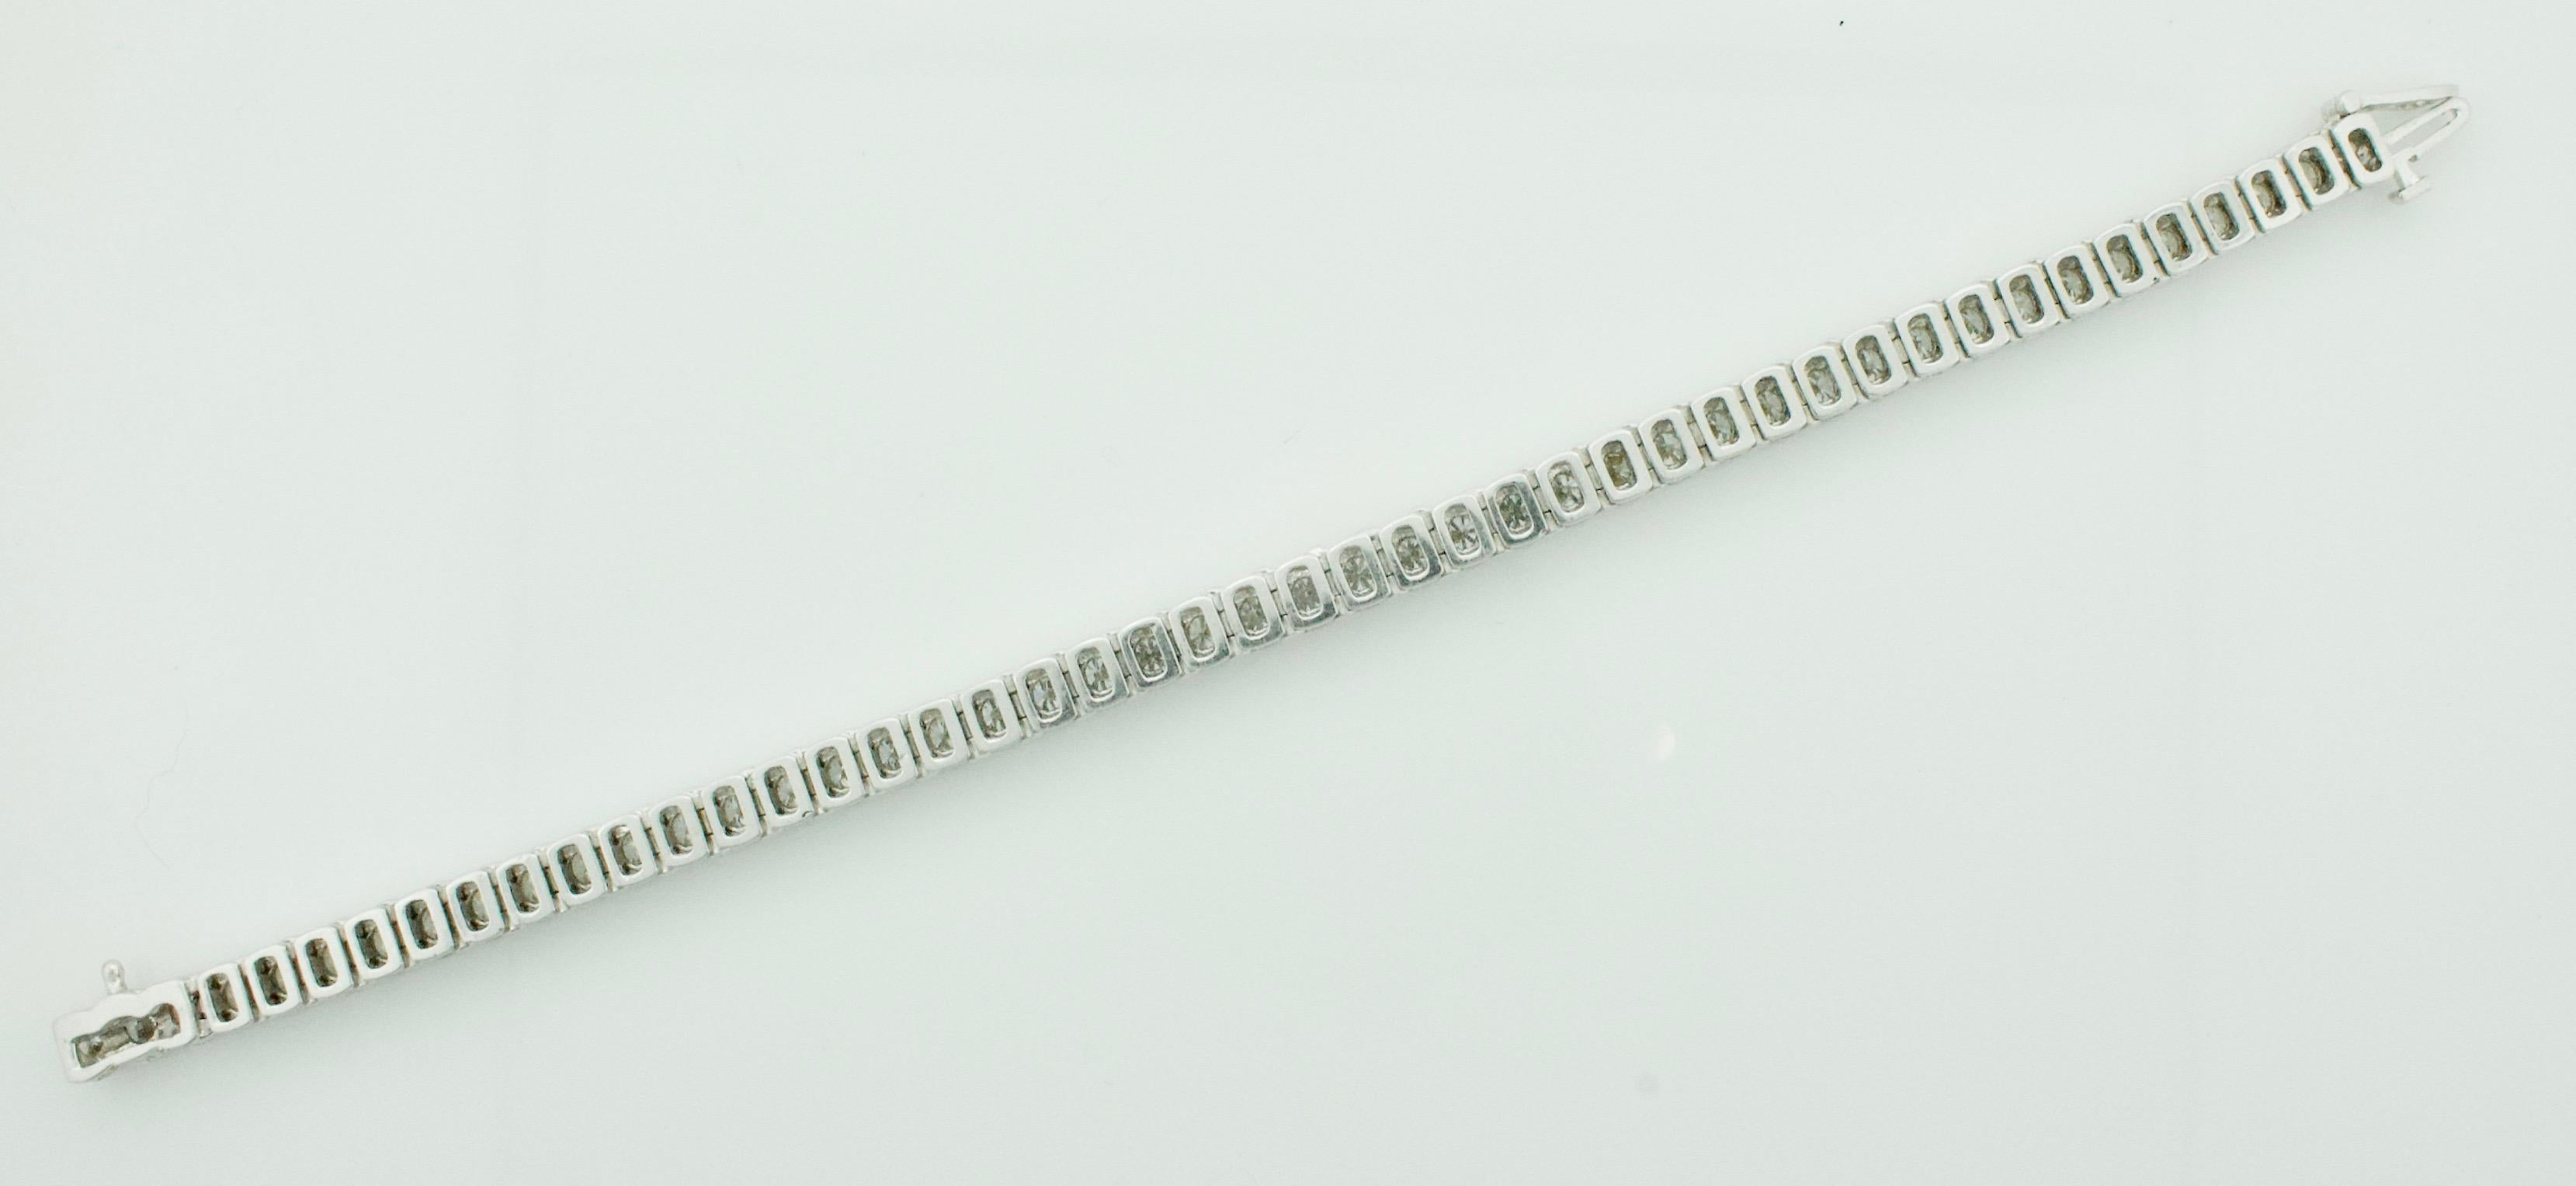 Diamond Straight Line Bracelet 7.10 carats in White Gold

Looking for a stunning addition to your jewelry collection? Look no further than this exquisite Diamond Straight Line Bracelet in White Gold. With 48 round brilliant cut diamonds weighing